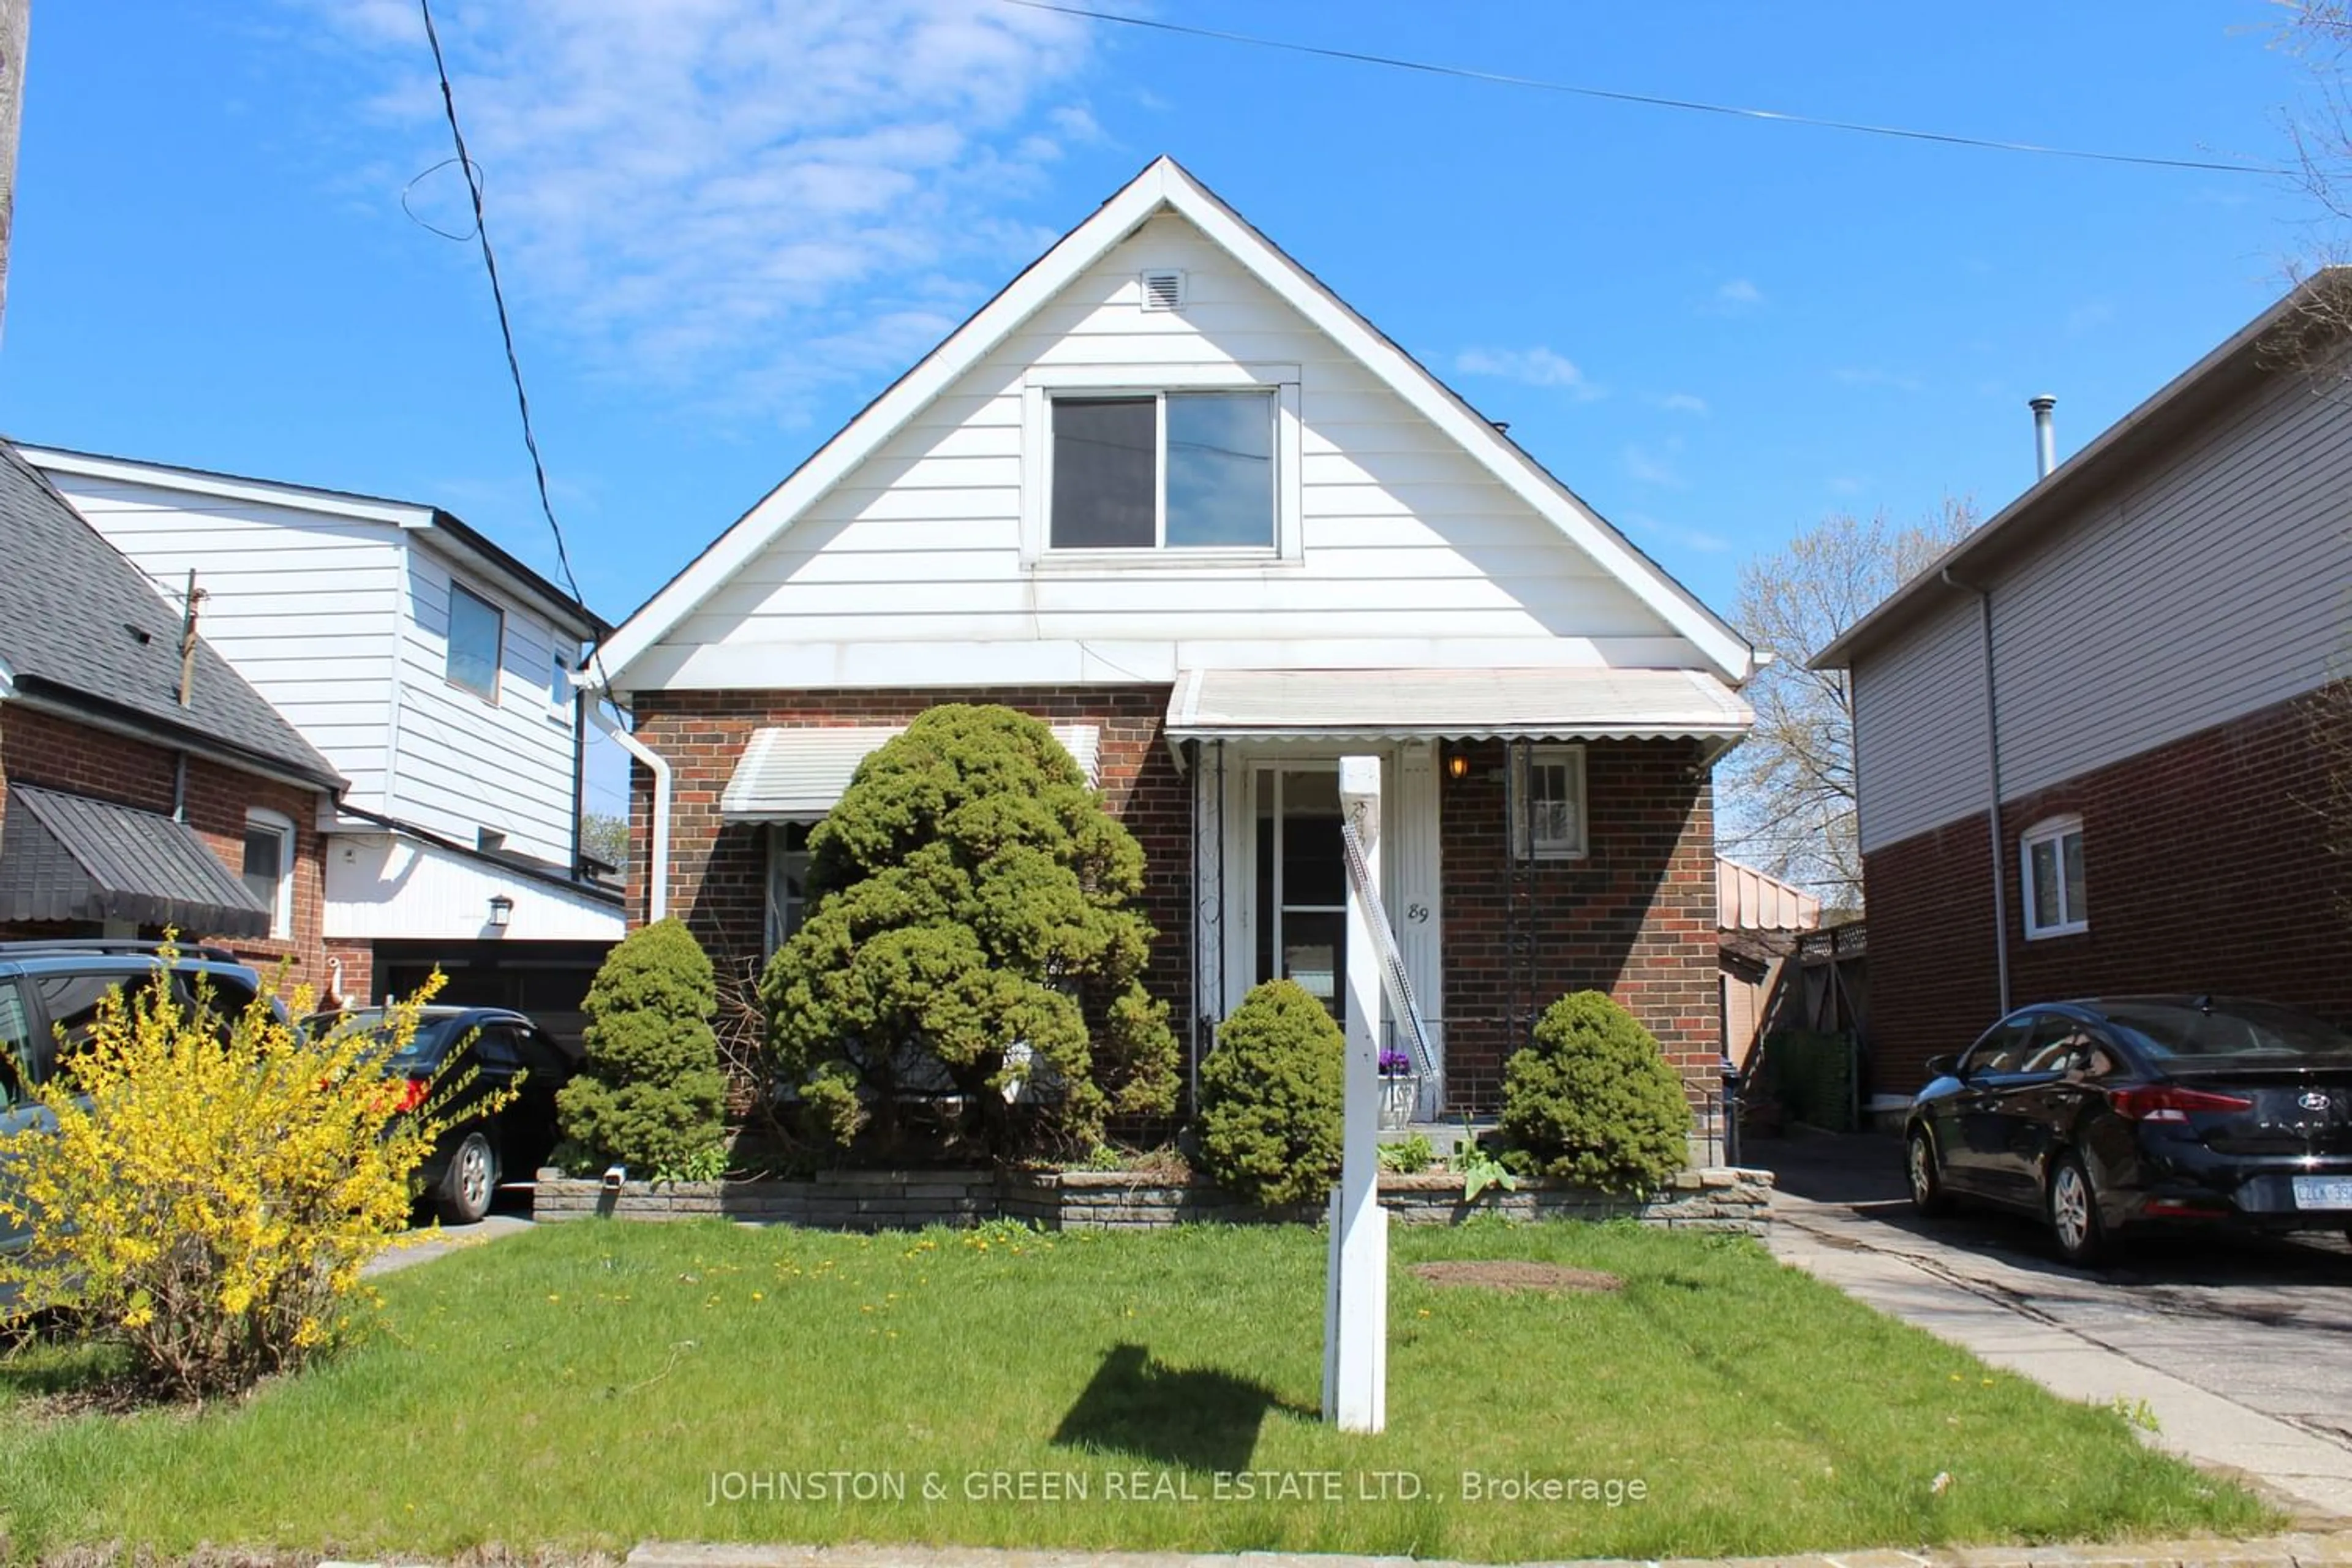 Frontside or backside of a home for 89 Binswood Ave, Toronto Ontario M4C 3P1